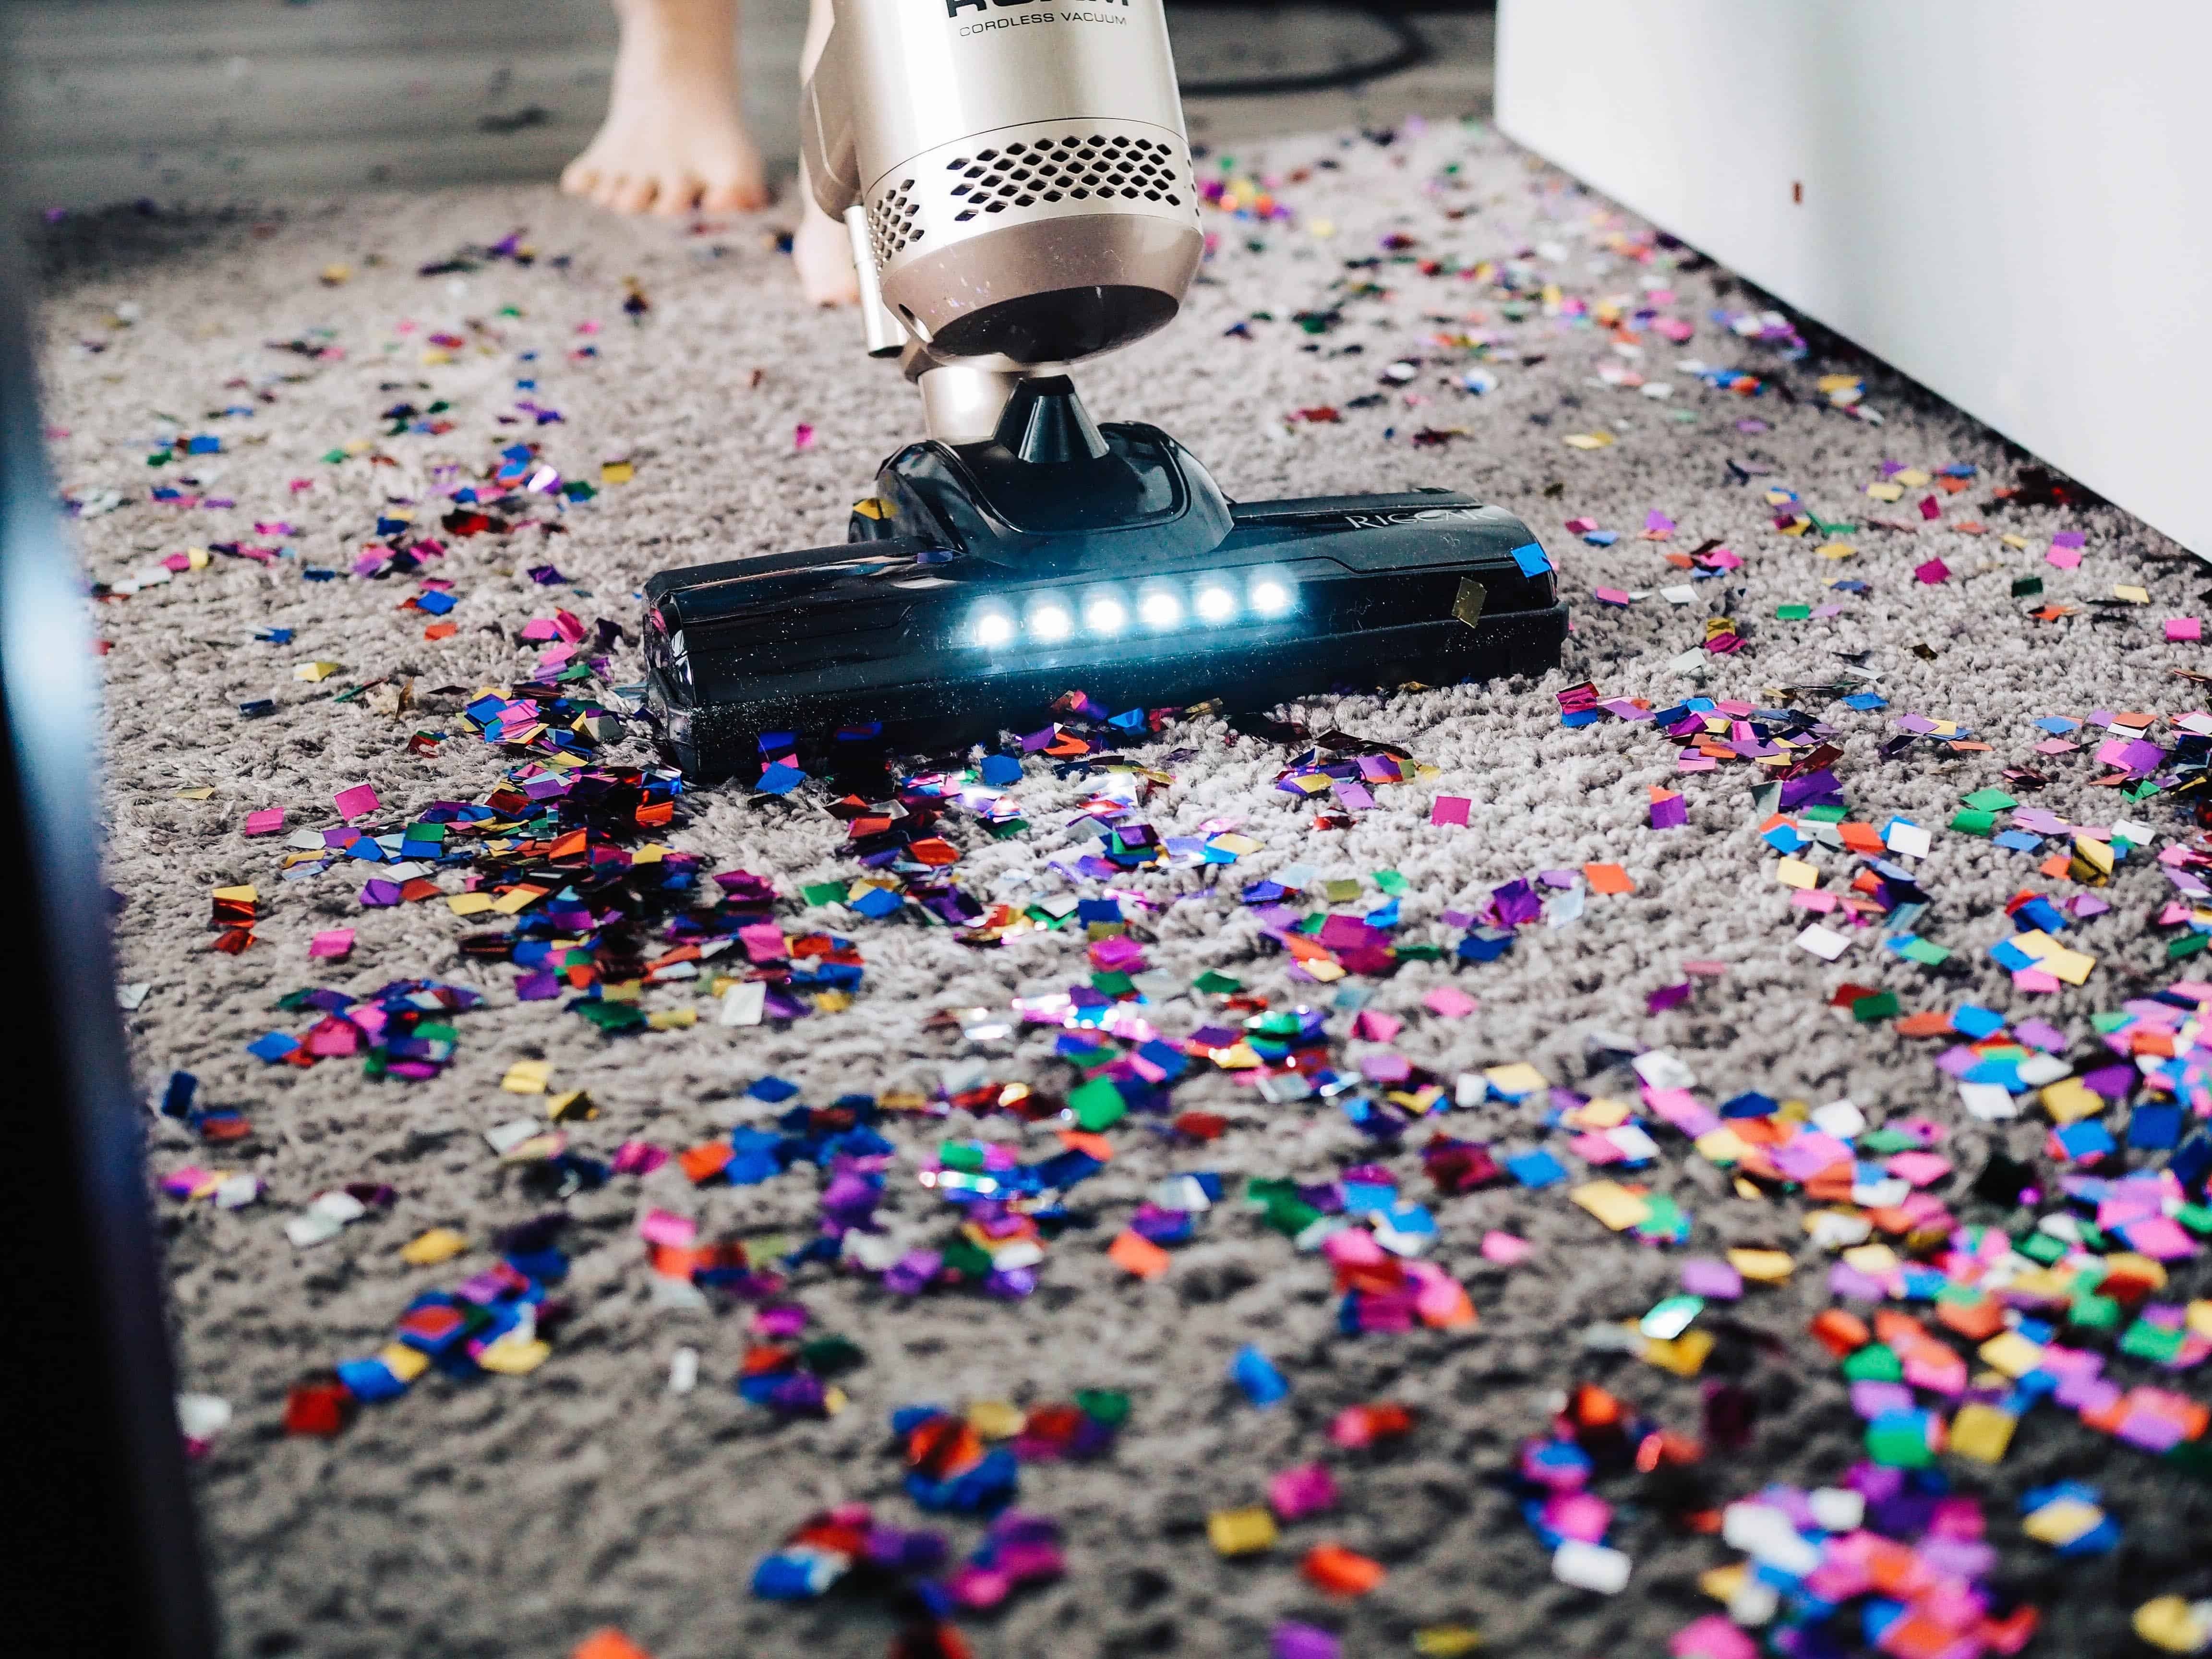 A Look at the Best Shark Vacuums for Your Home